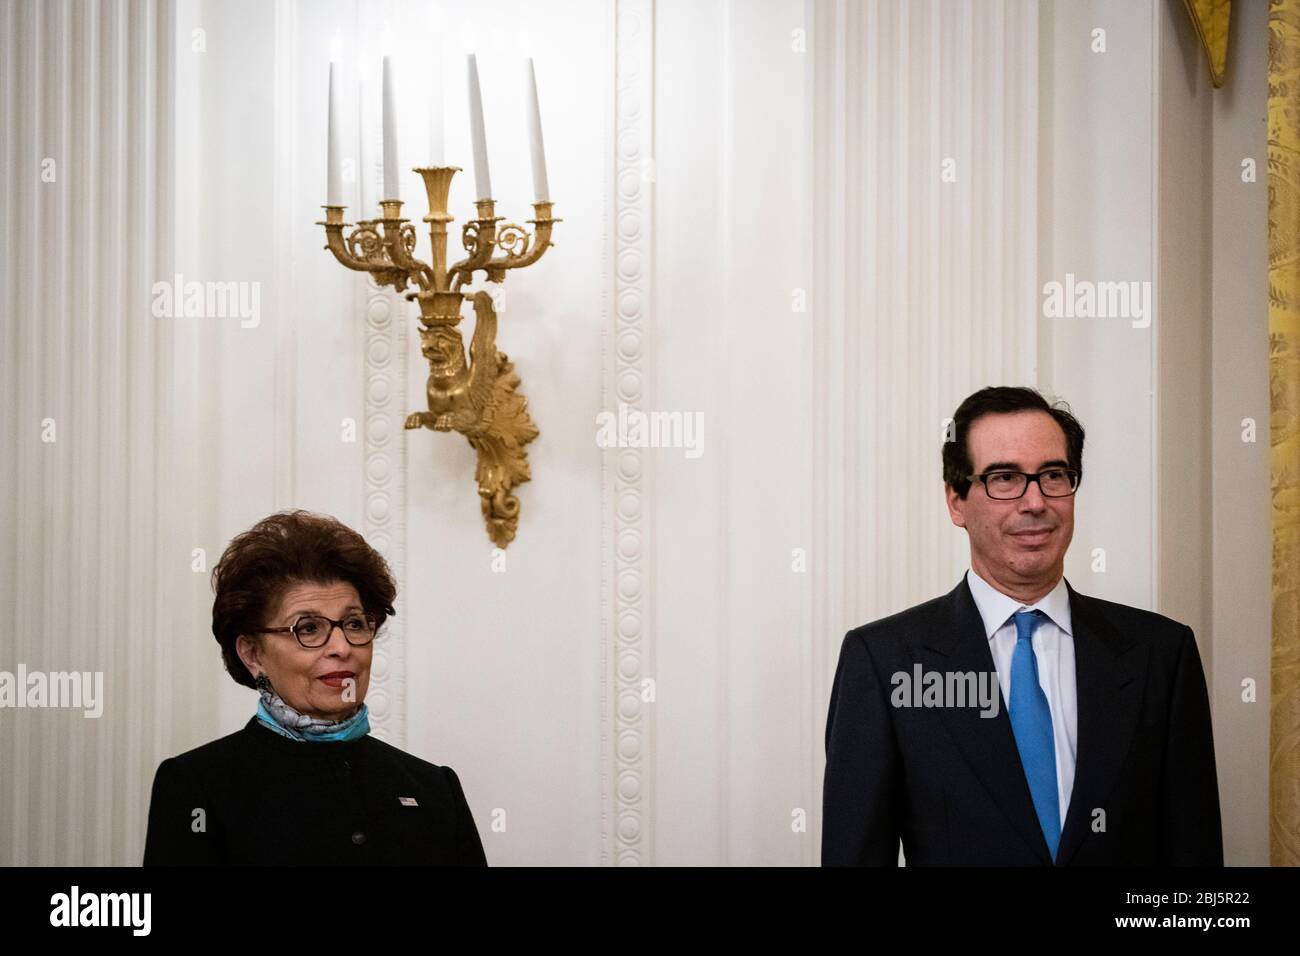 Jovita Carranza, administrator of the United States Small Business Administration (SBA), and United States Secretary of the Treasury Steven T. Mnuchin, listen during a Paycheck Protection Program (PPP) event in the East Room of the White House in Washington, DC, U.S., on Tuesday, April 28, 2020. US President Donald J. Trump defended his early, dismissive response to the coronavirus outbreak, saying Tuesday that he was told late in February that it wouldn't be a problem. Credit: Al Drago/Pool via CNP/MediaPunch Stock Photo